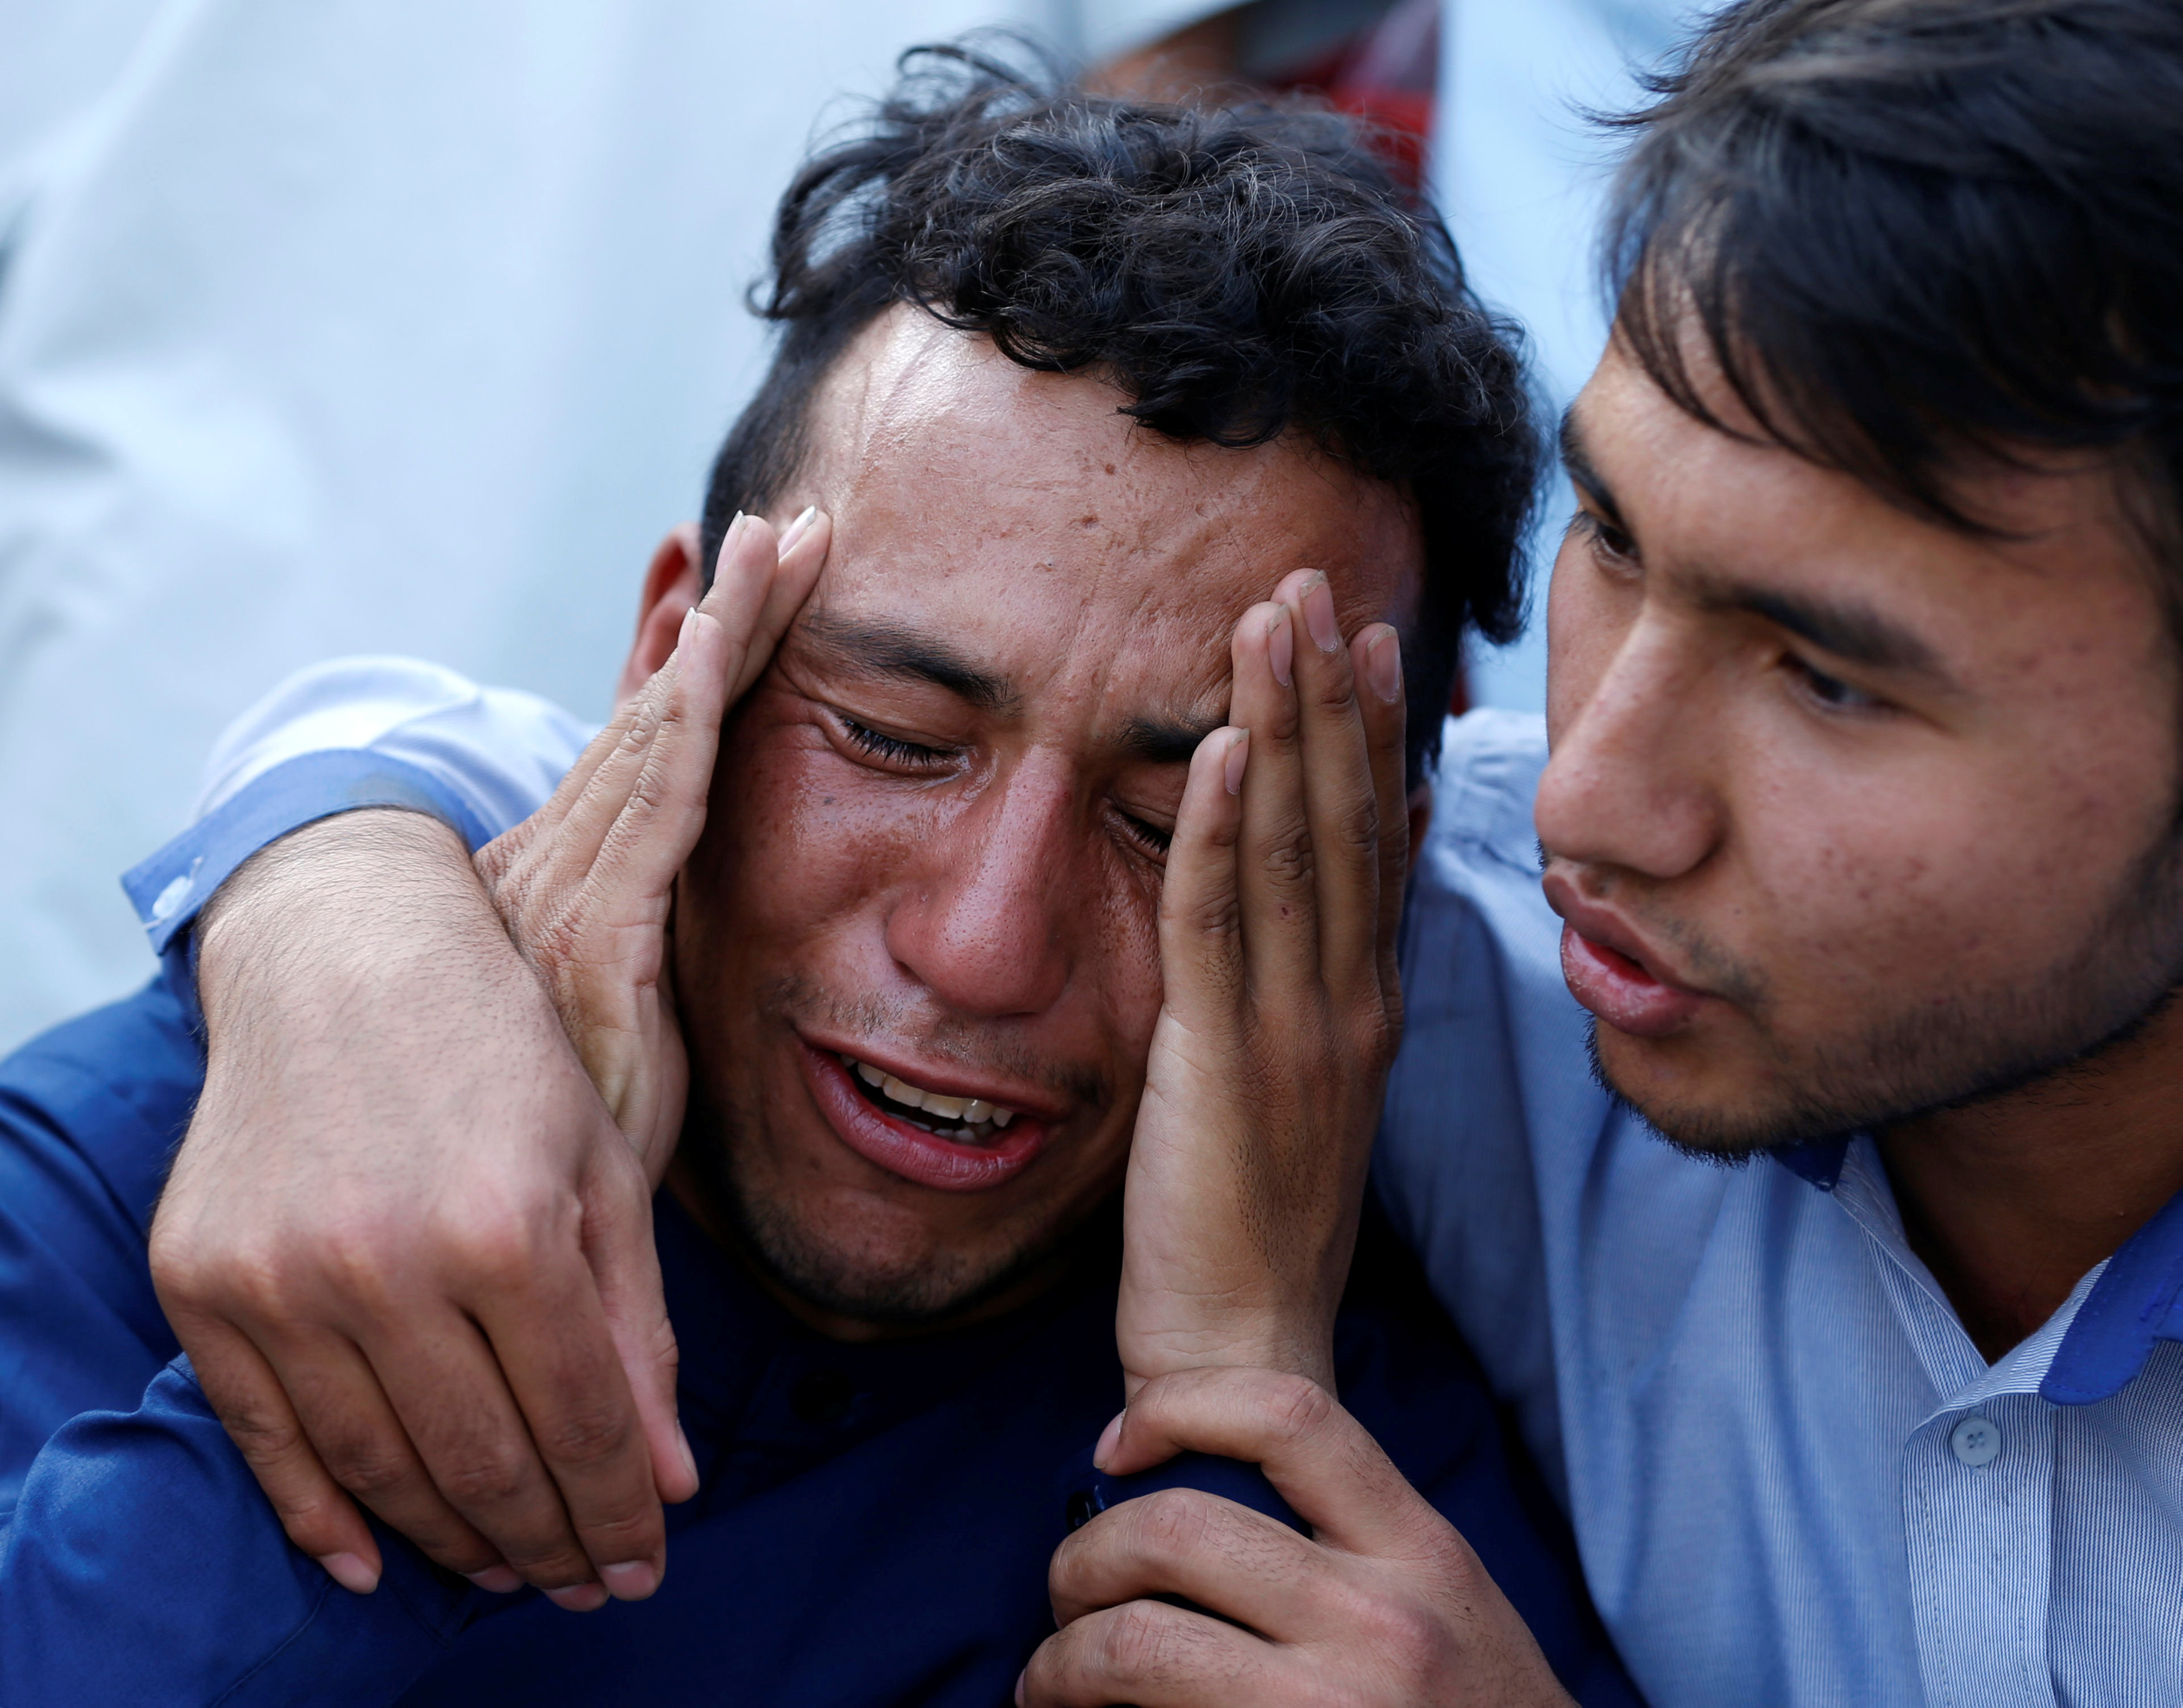 80 killed, more than 230 injured in Kabul attack claimed by IS group